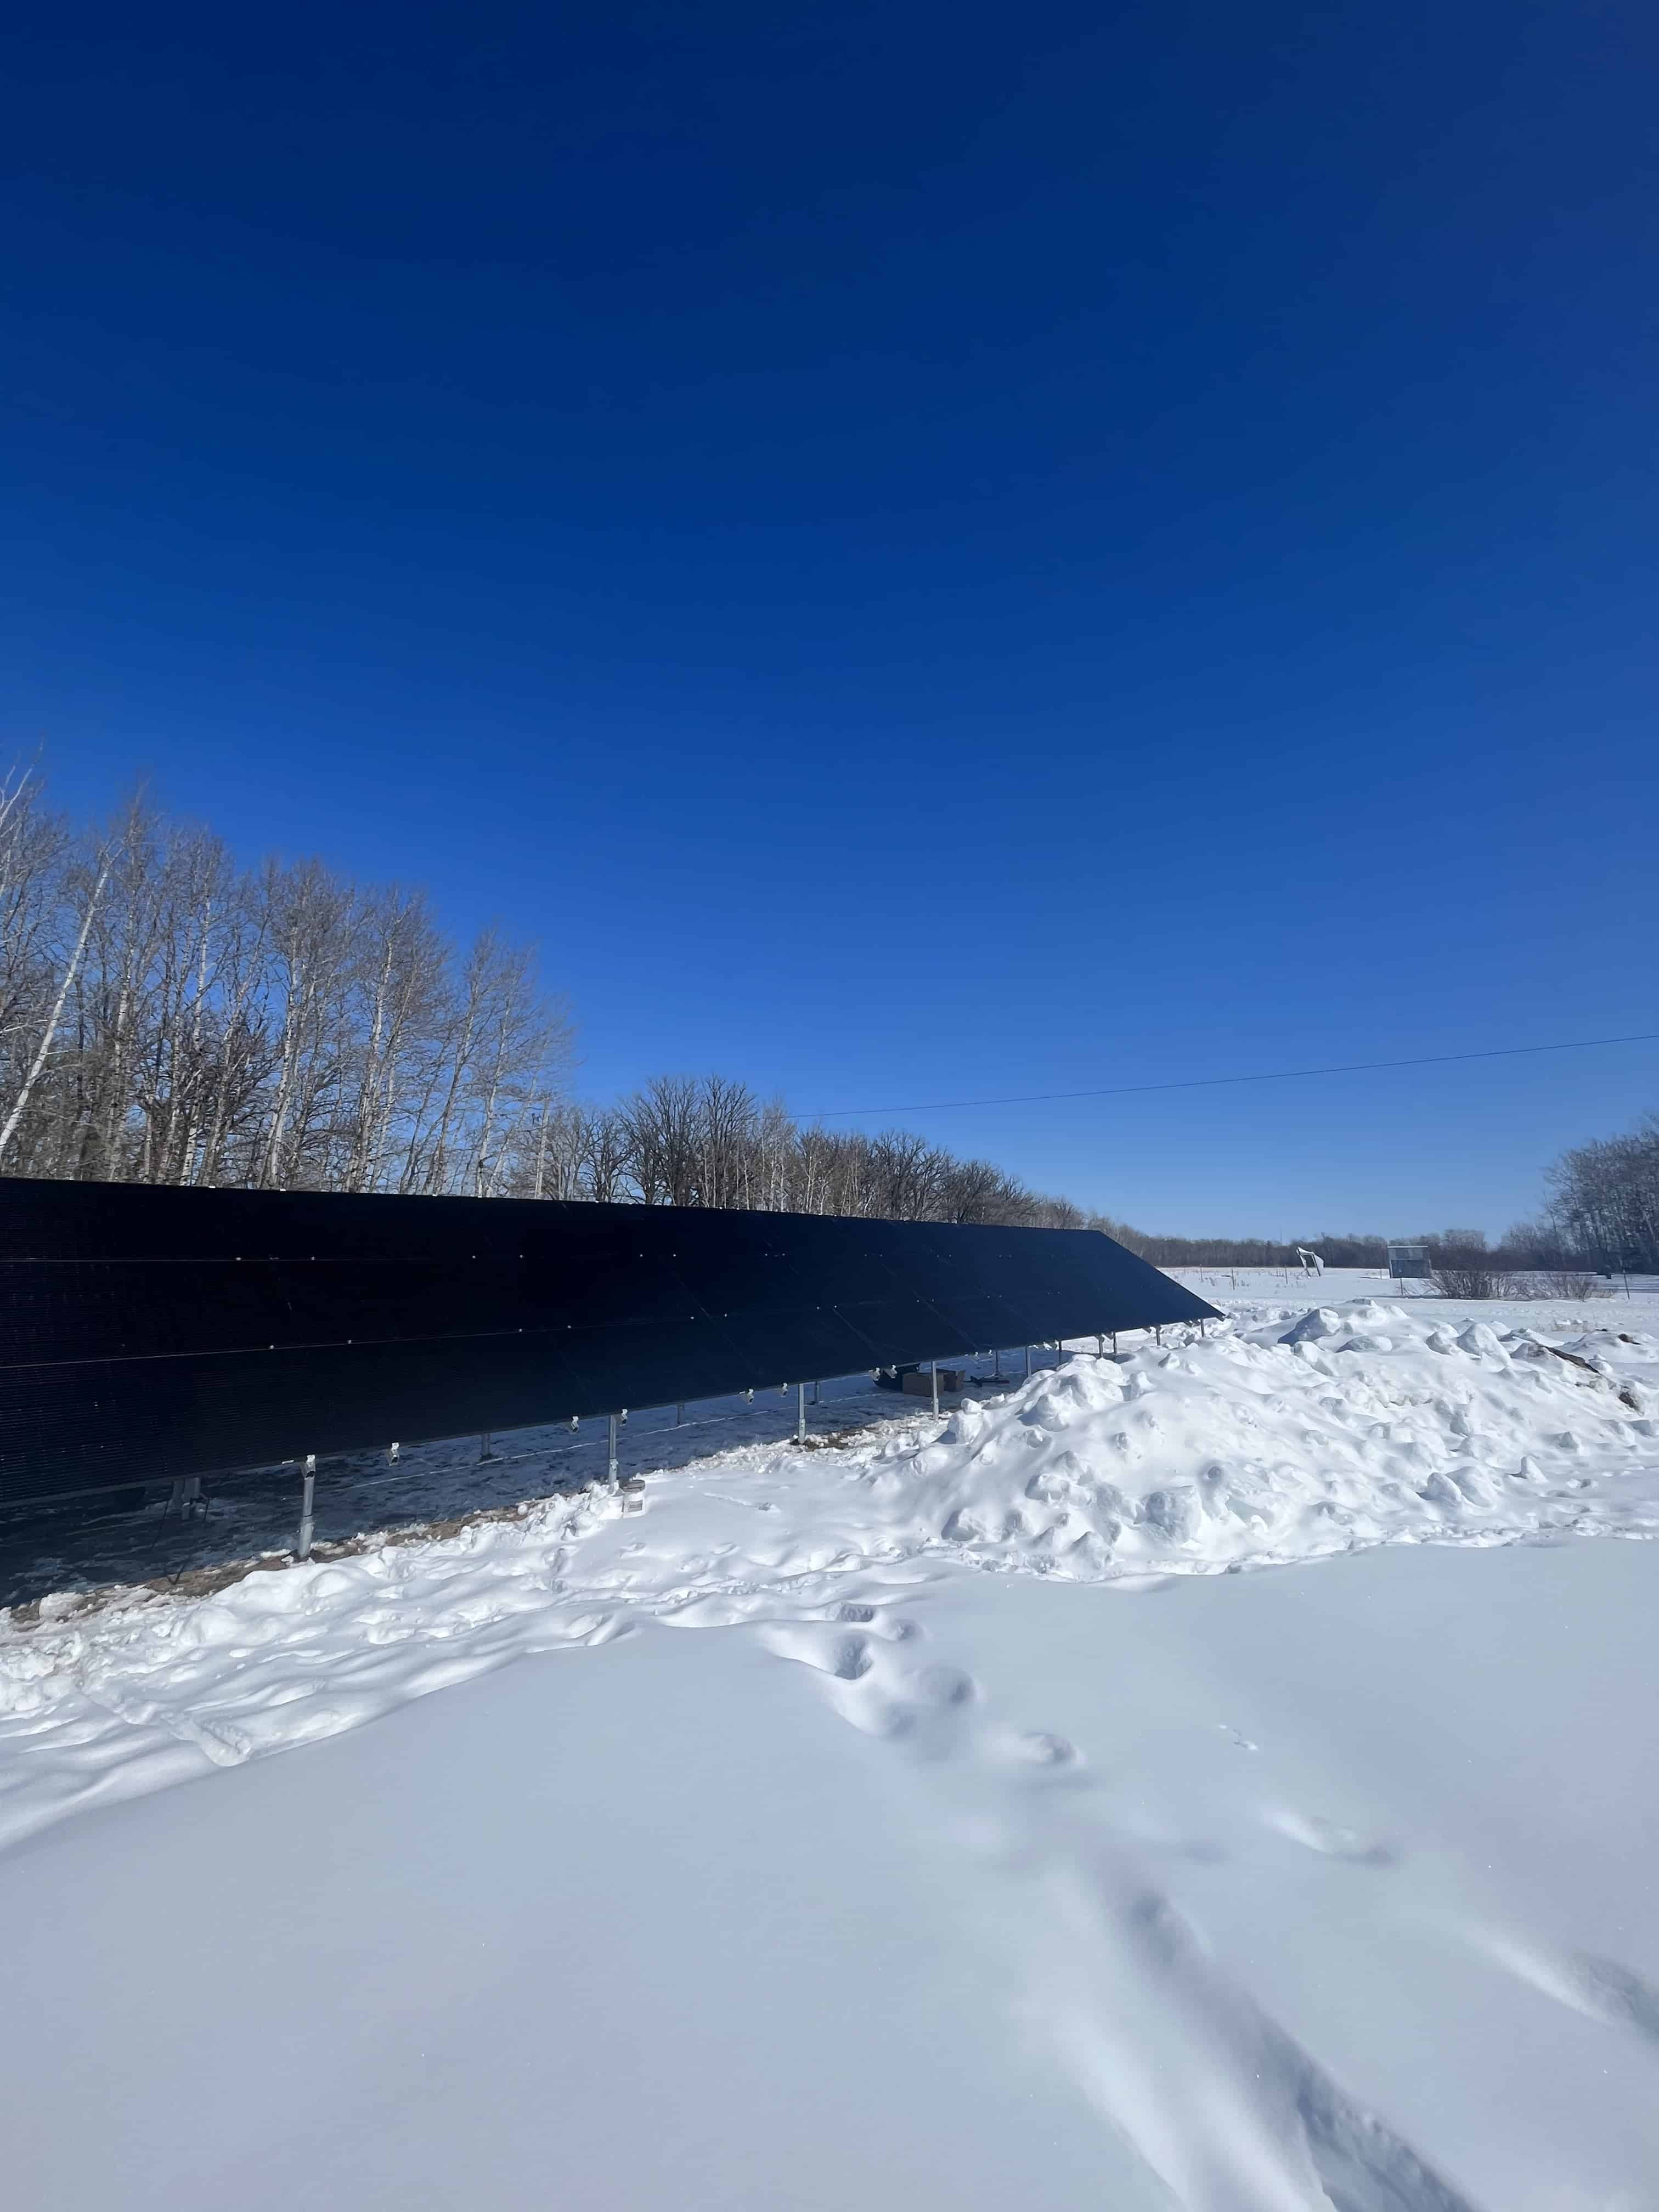 Solar Panels Generating Power In Colder Temperatures | Wolf River Electric